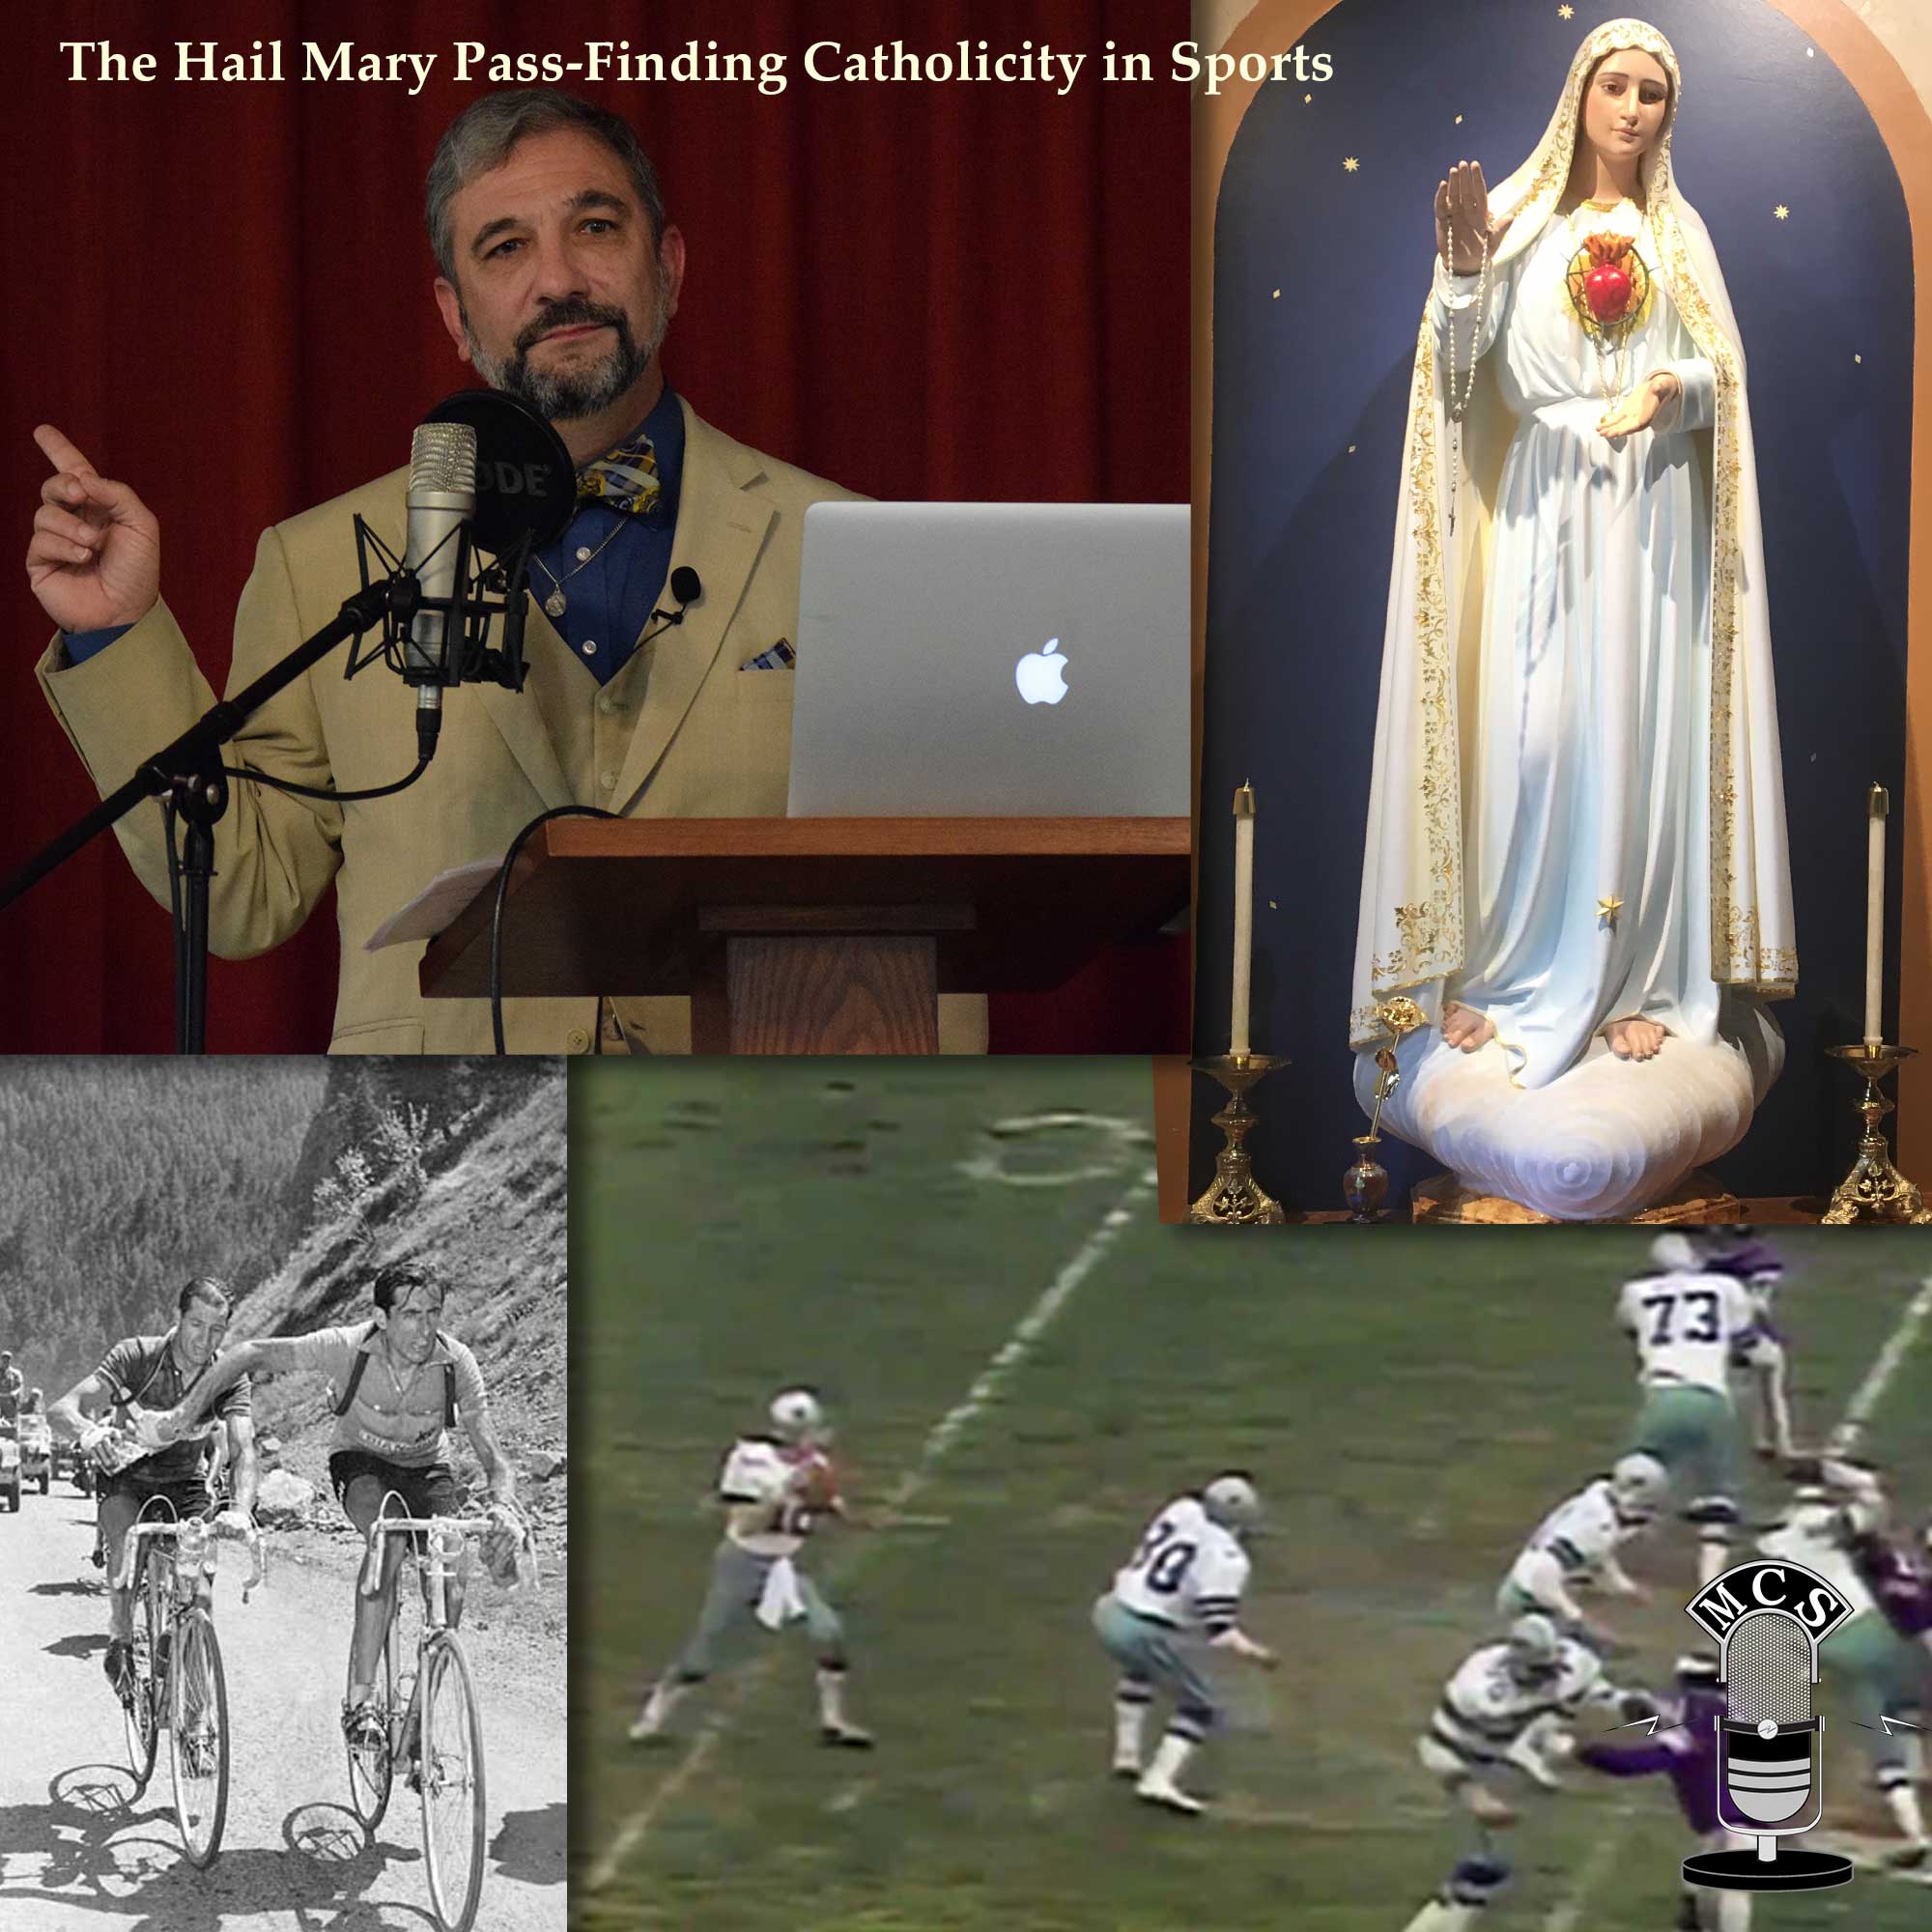 Why Catholics Should Smile Every Time A "Hail Mary Pass" Is Thrown